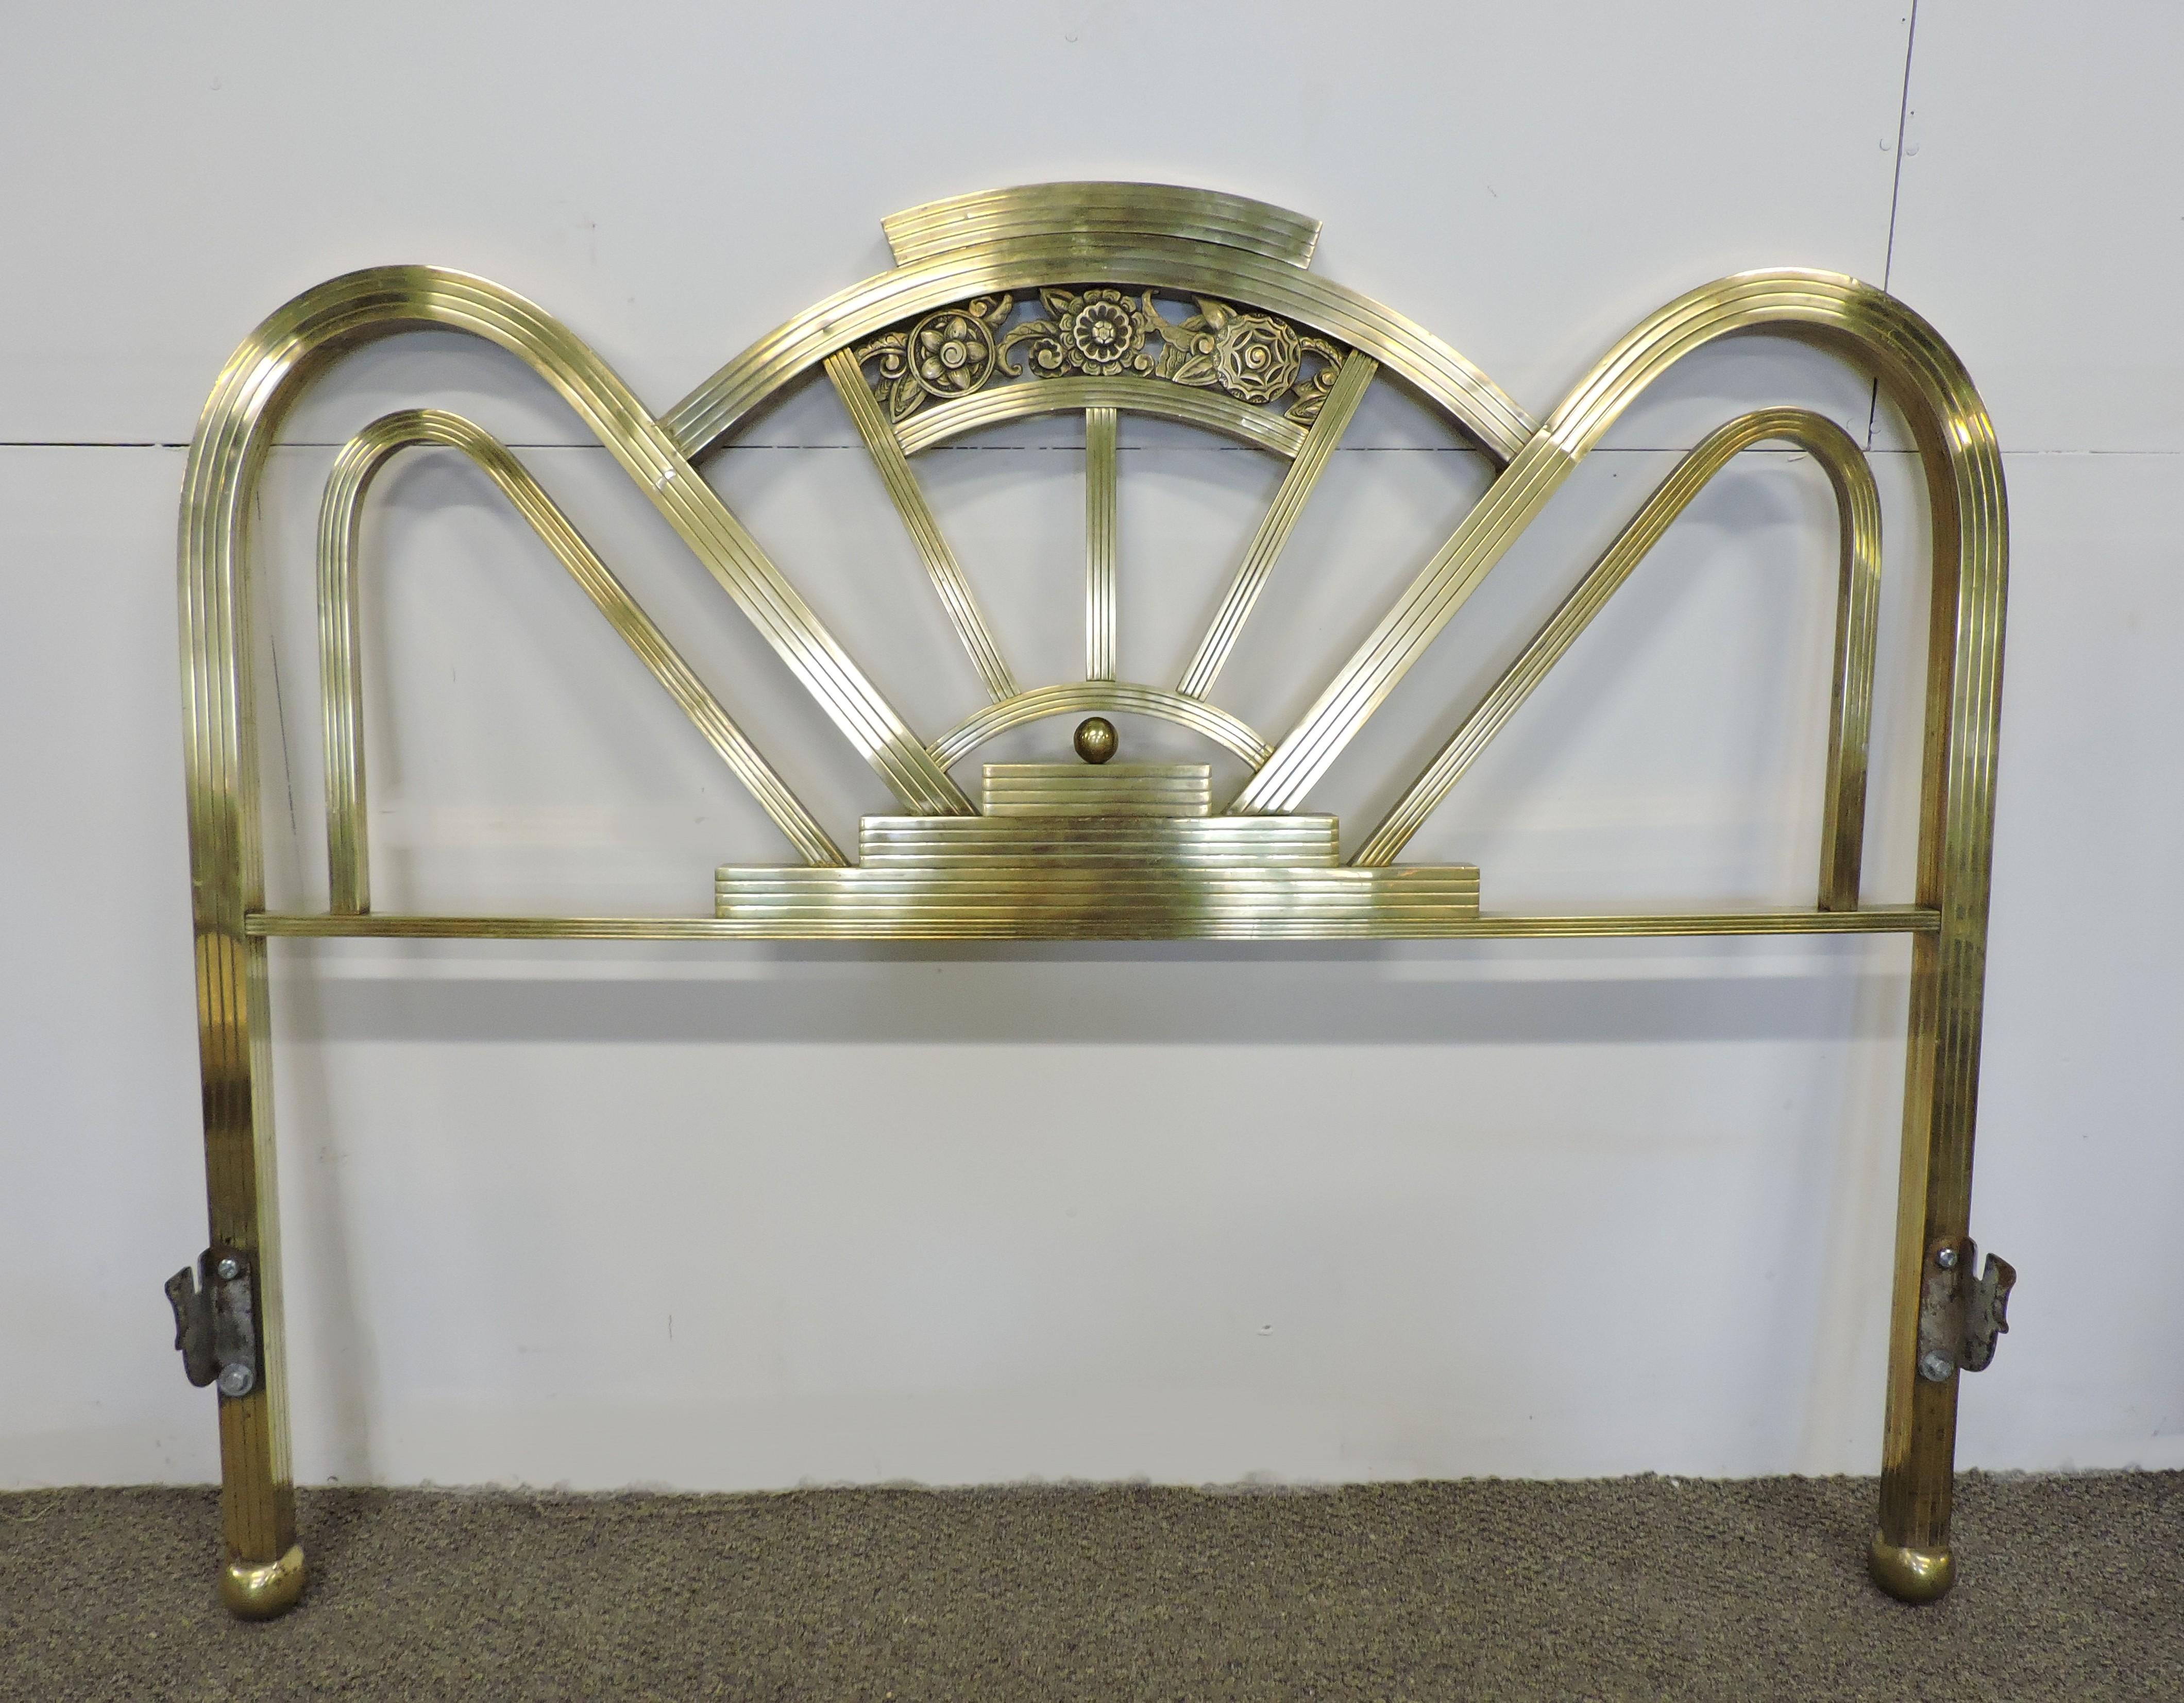 Glamourous and unique Art Deco brass bed from the 1930s. This set includes a headboard and footboard in an arched and stepped design with floral accents and ball feet. At 52.5 inches wide, this could be used with a full size, or possibly a queen